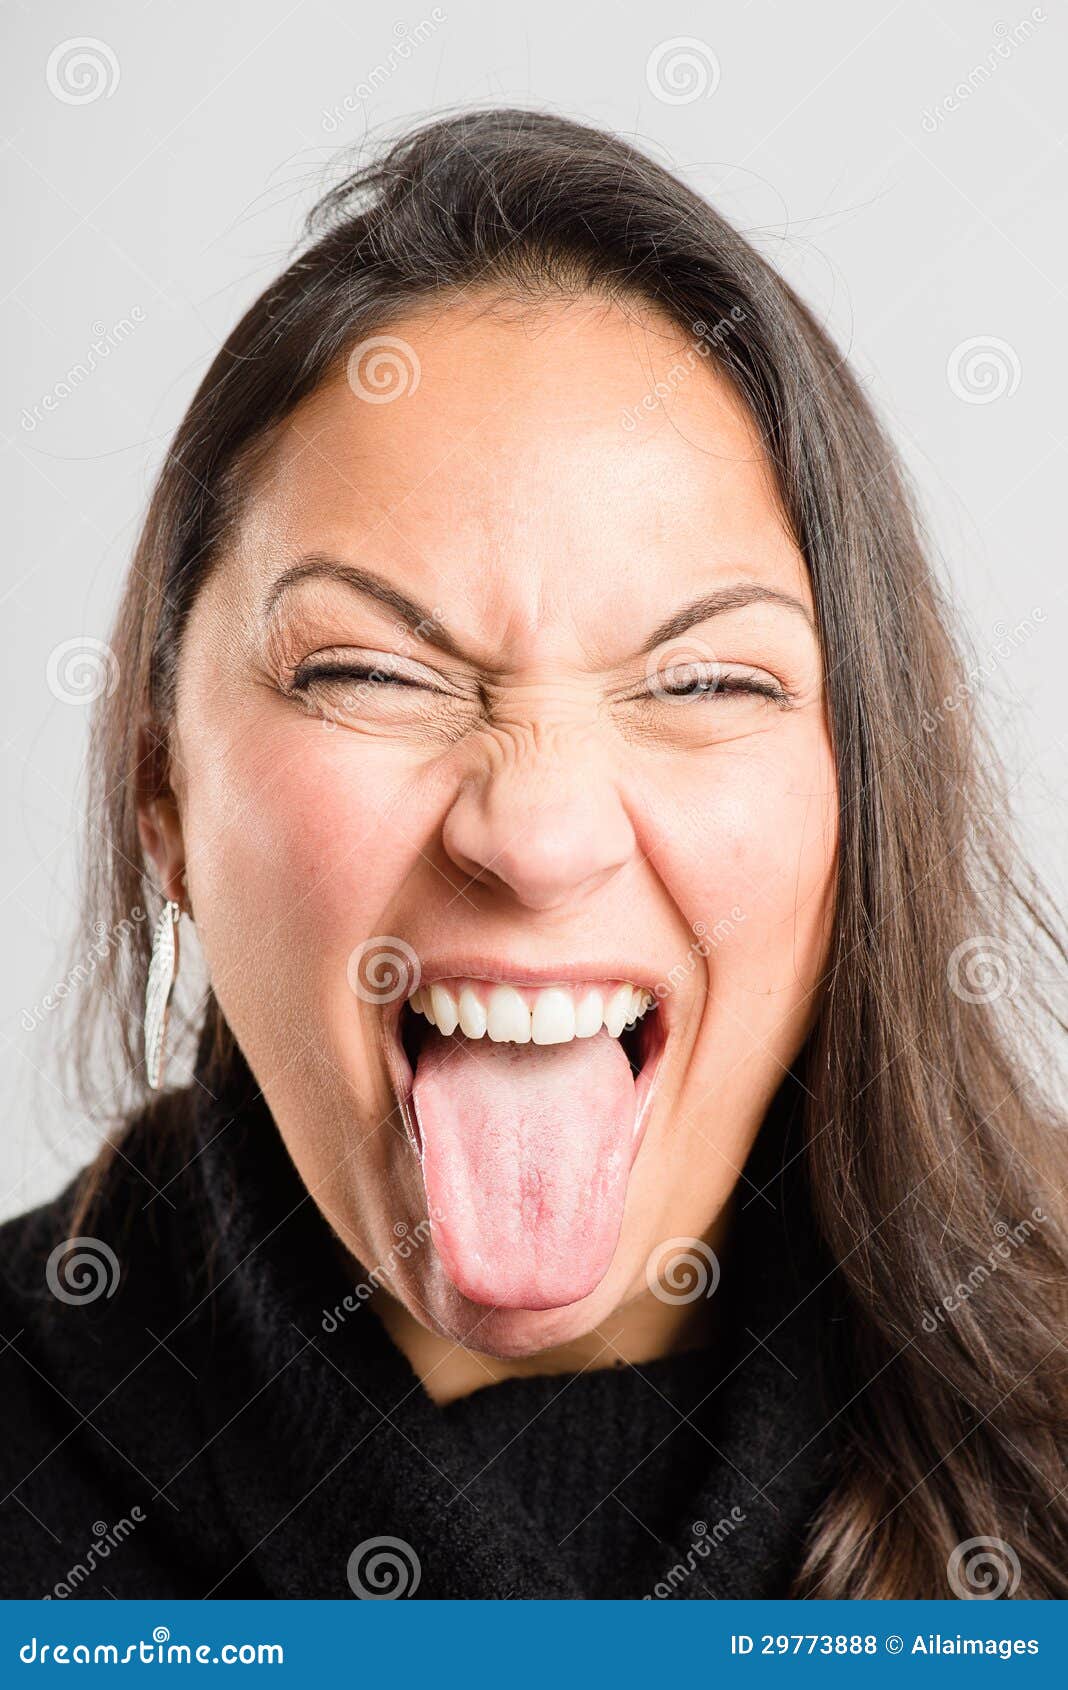 Funny Woman Portrait Real People High Definition Grey Background ...